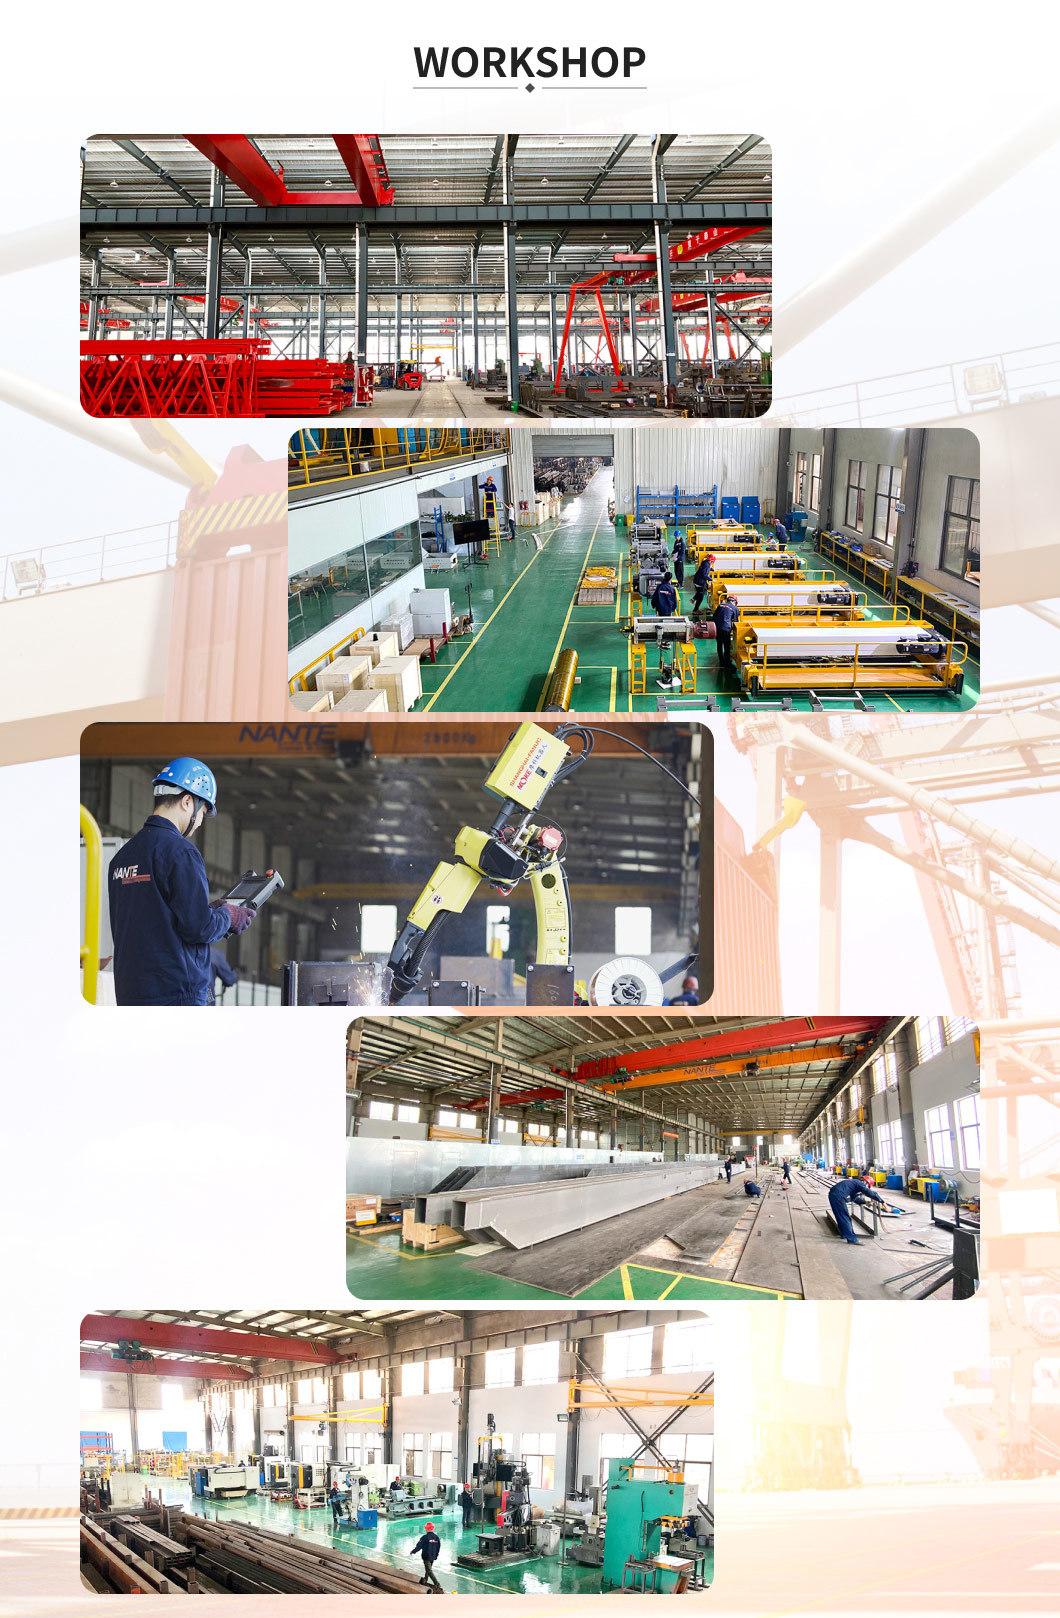 Reliable Quality Double Girder Overhead Crane with Electric Open Winch